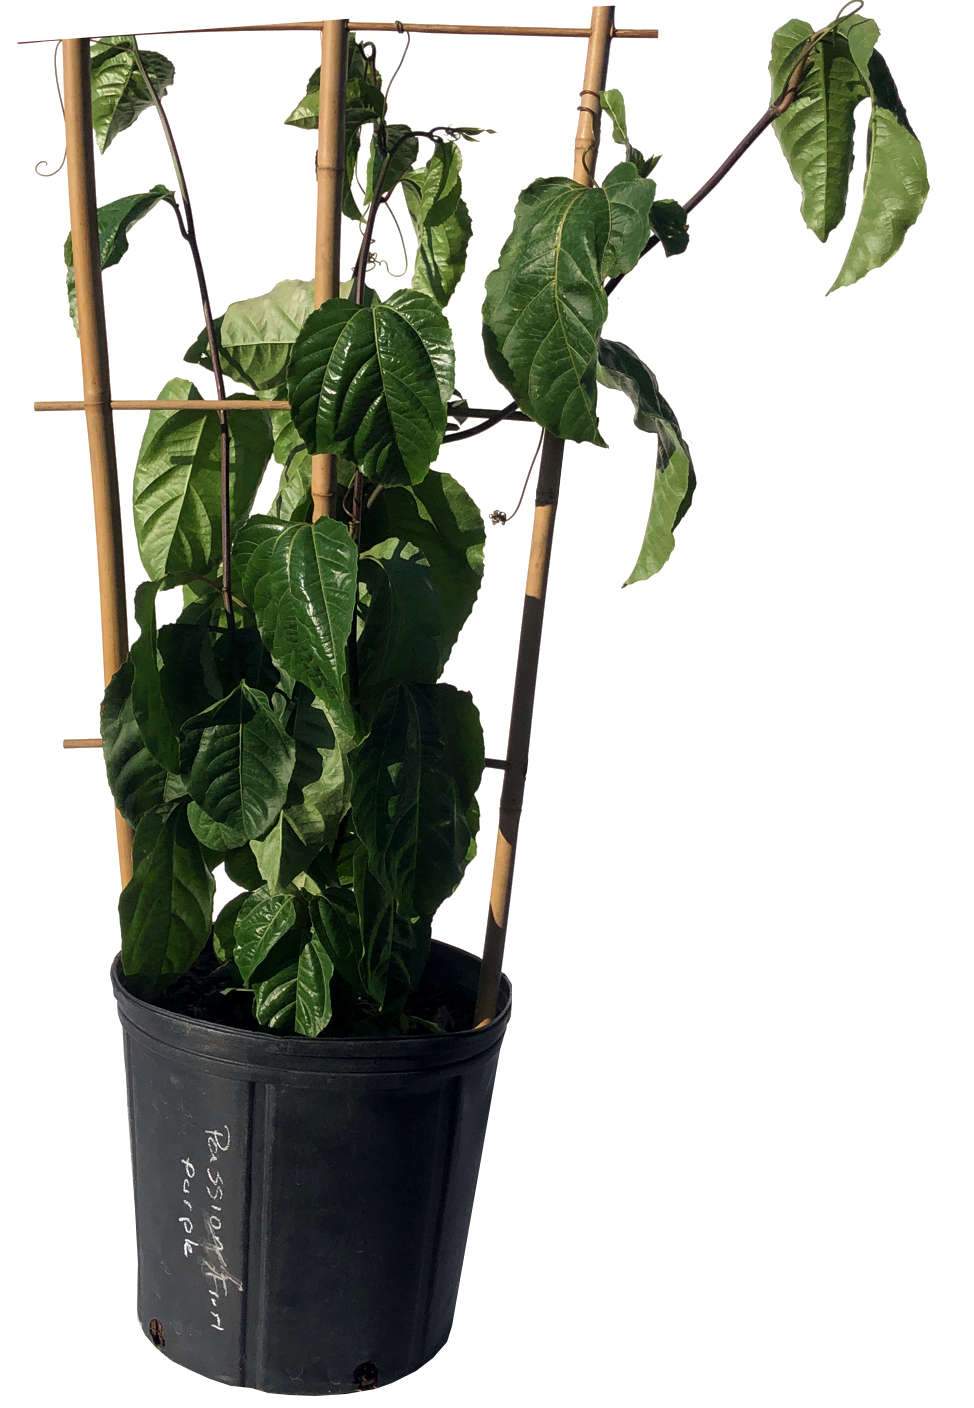 Passion Fruit Vine Purple Variety, 2 Feet Tall, 3-gal Container from Florida